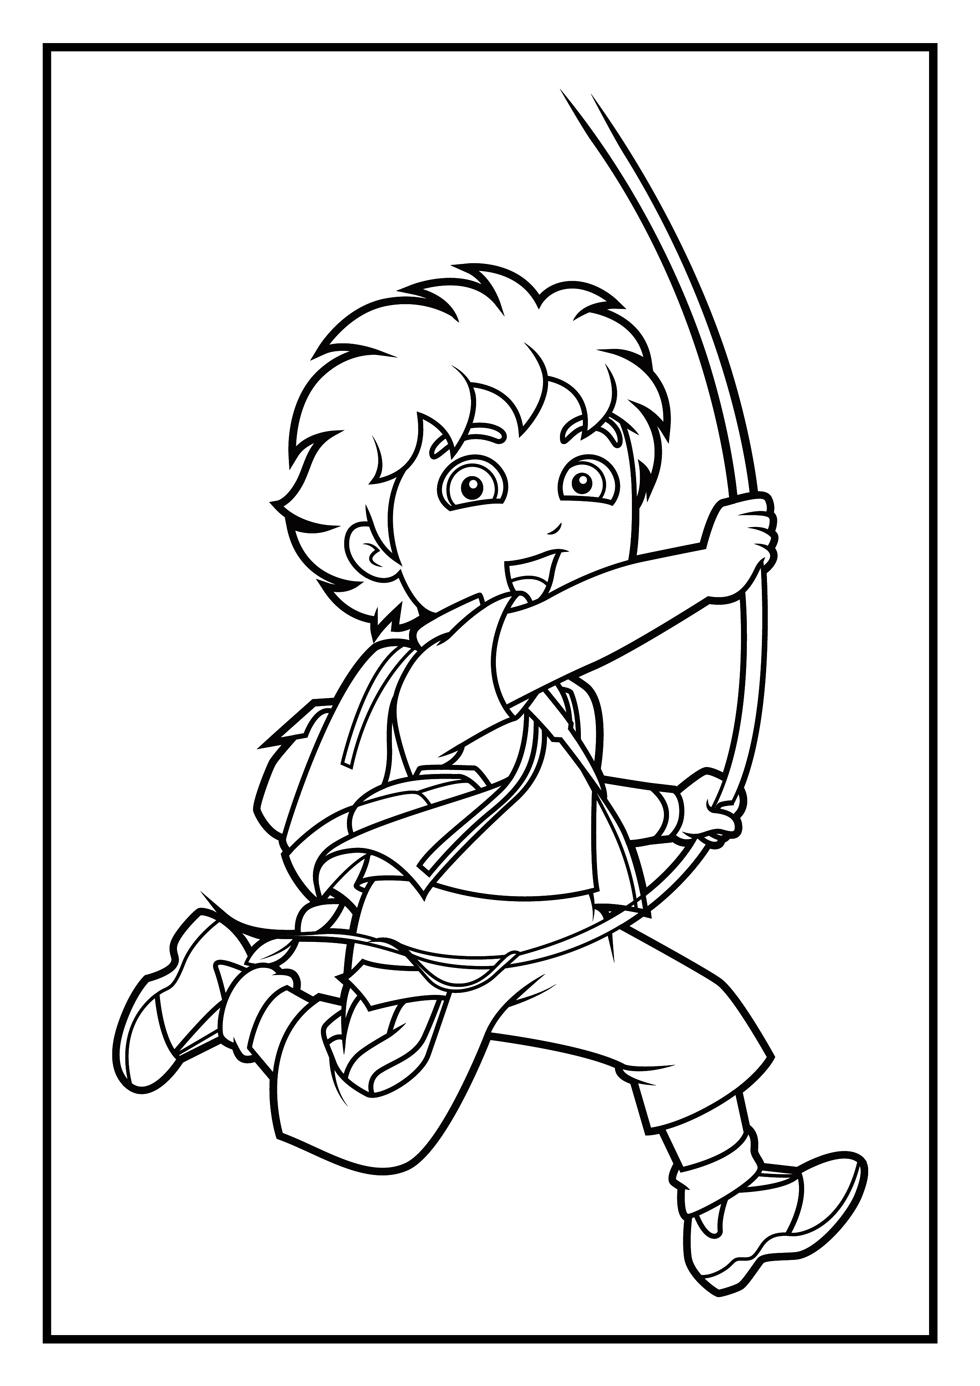 dago coloring pages - photo #44